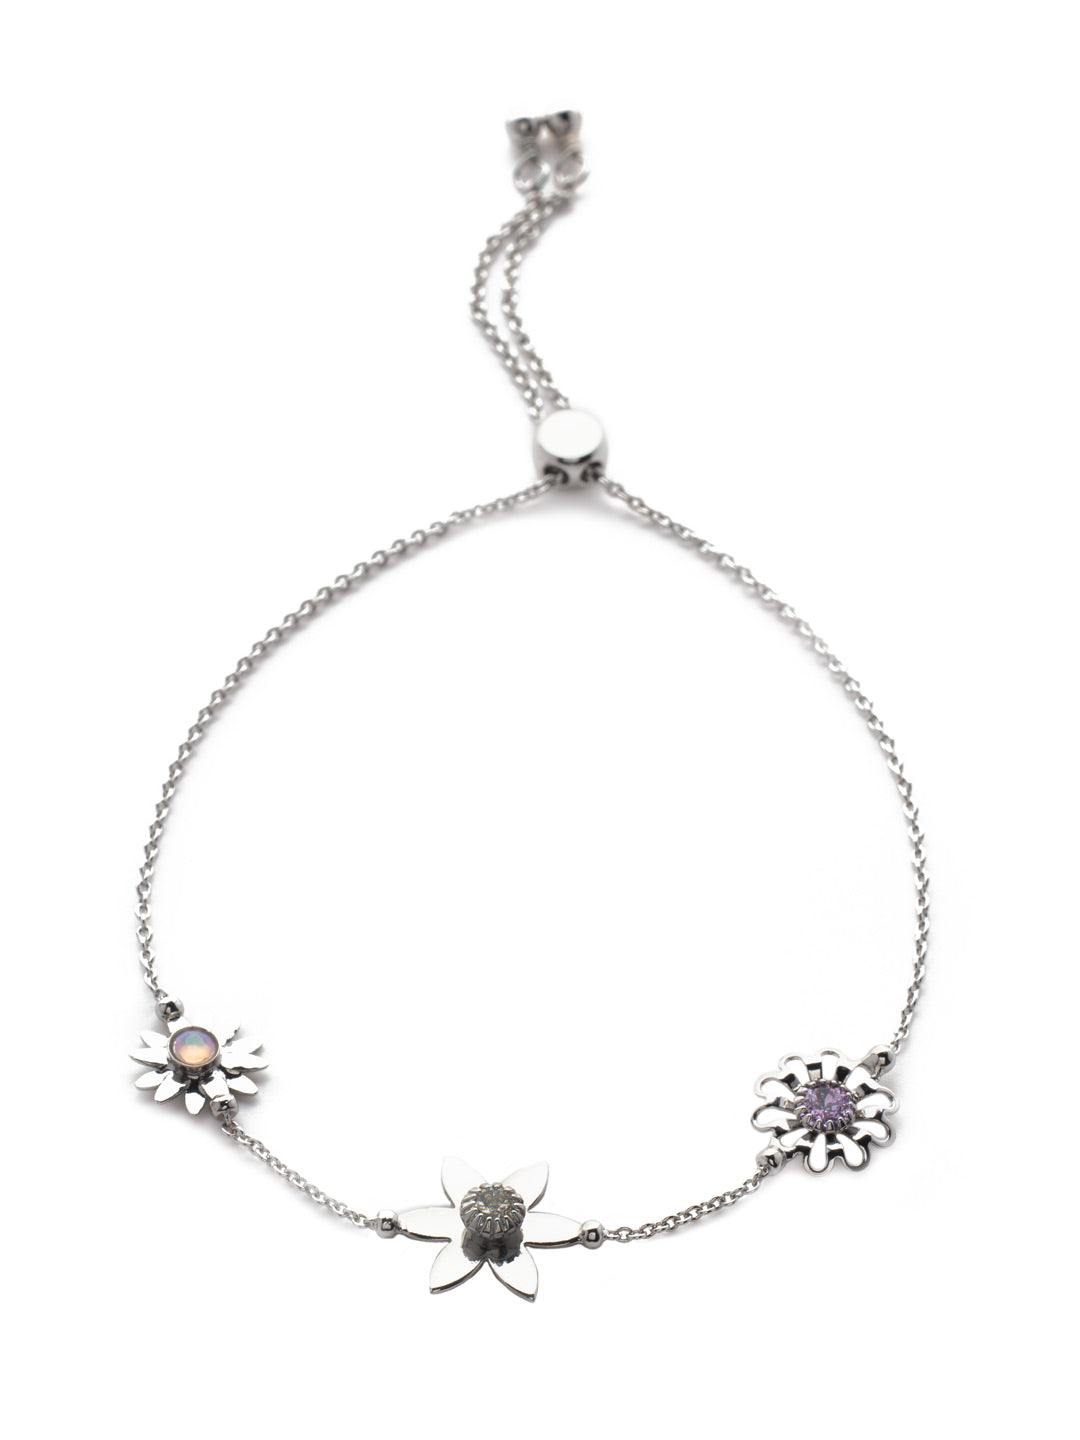 Normani Slider Bracelet - BEV1PDCCC - <p>The Normani Slider Bracelet celebrates spring with floral charm accents and crystals that shine bright. Slide it on and fit to size. From Sorrelli's Cotton Candy Clouds collection in our Palladium finish.</p>